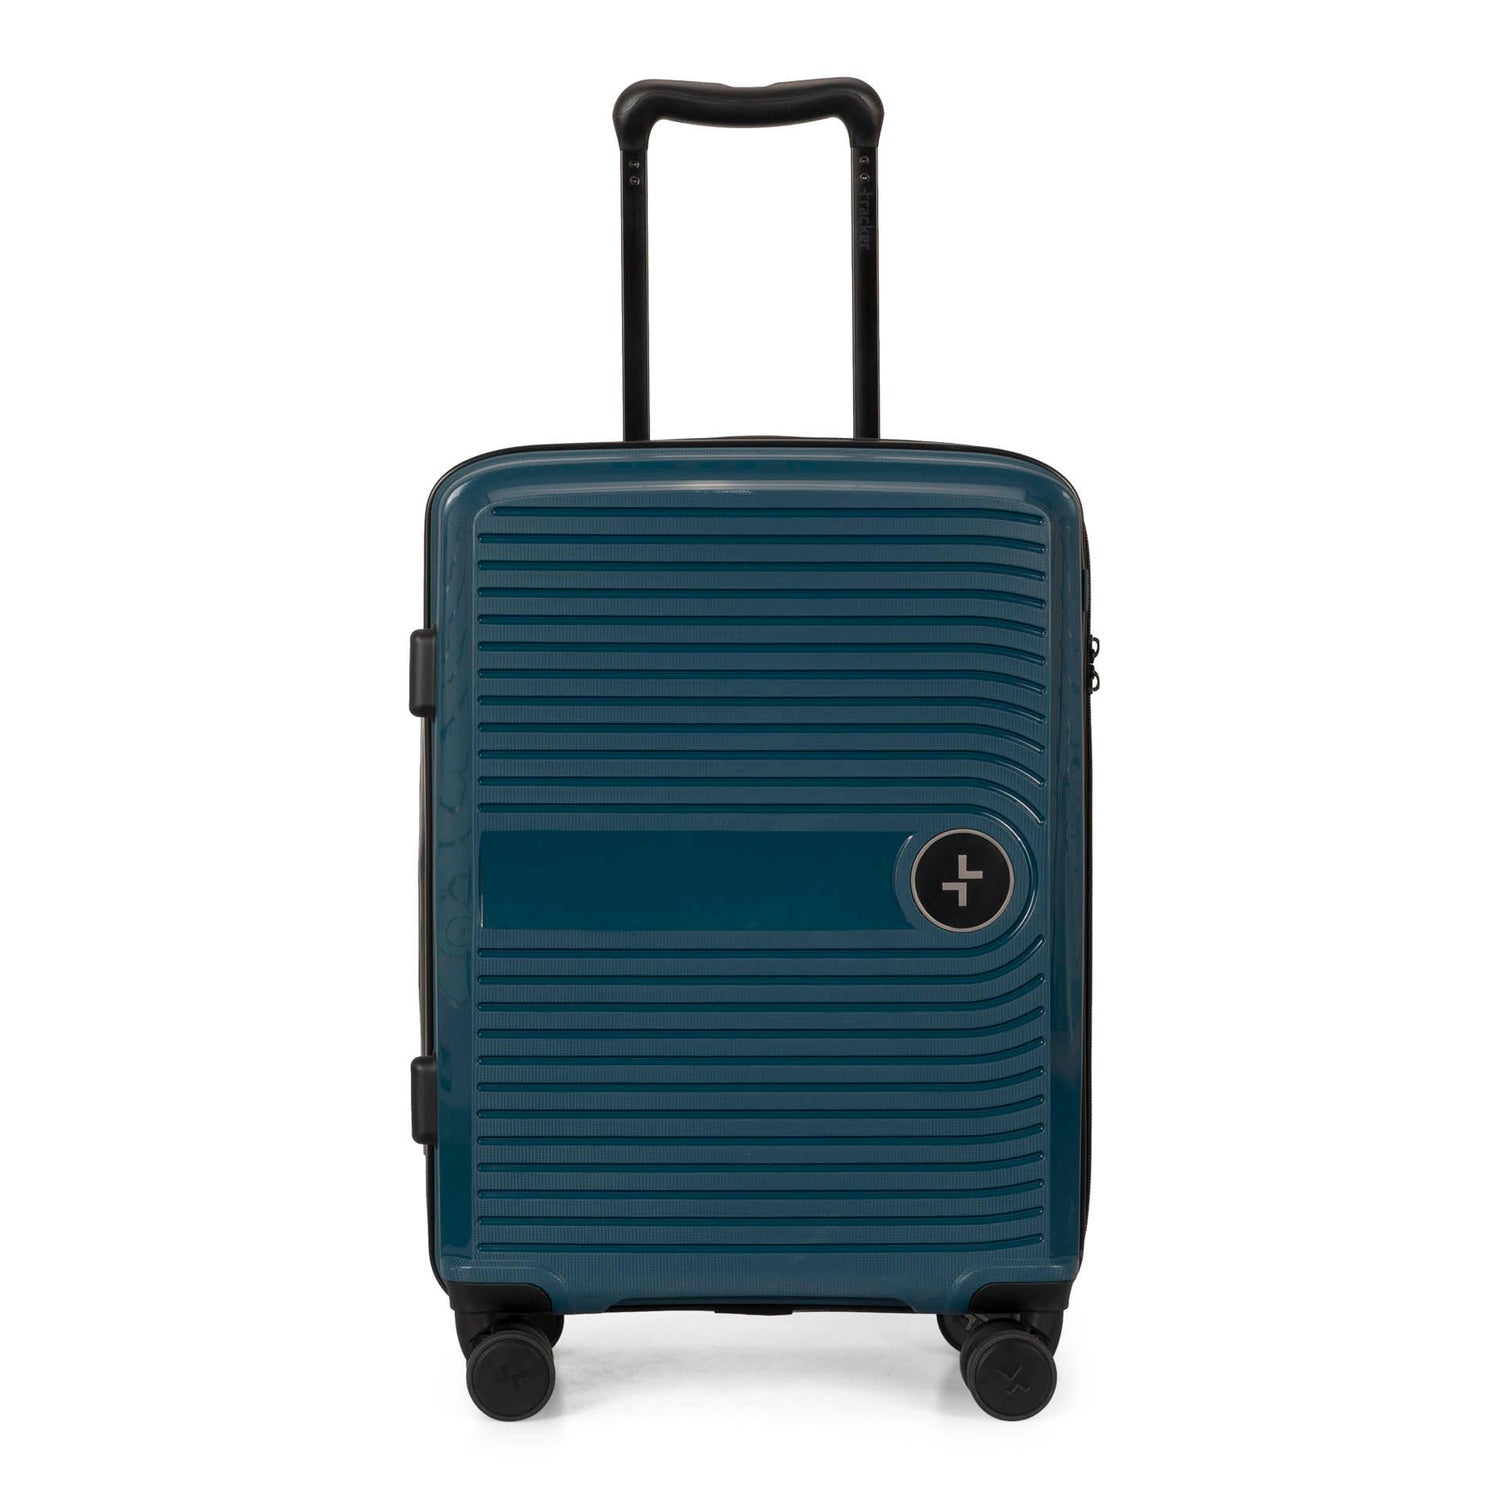 Front side of a navy luggage called Dynamo designed by Tracker showing its telescopic handle, lined-pattern shell, and tracker symbol embossed on the front.